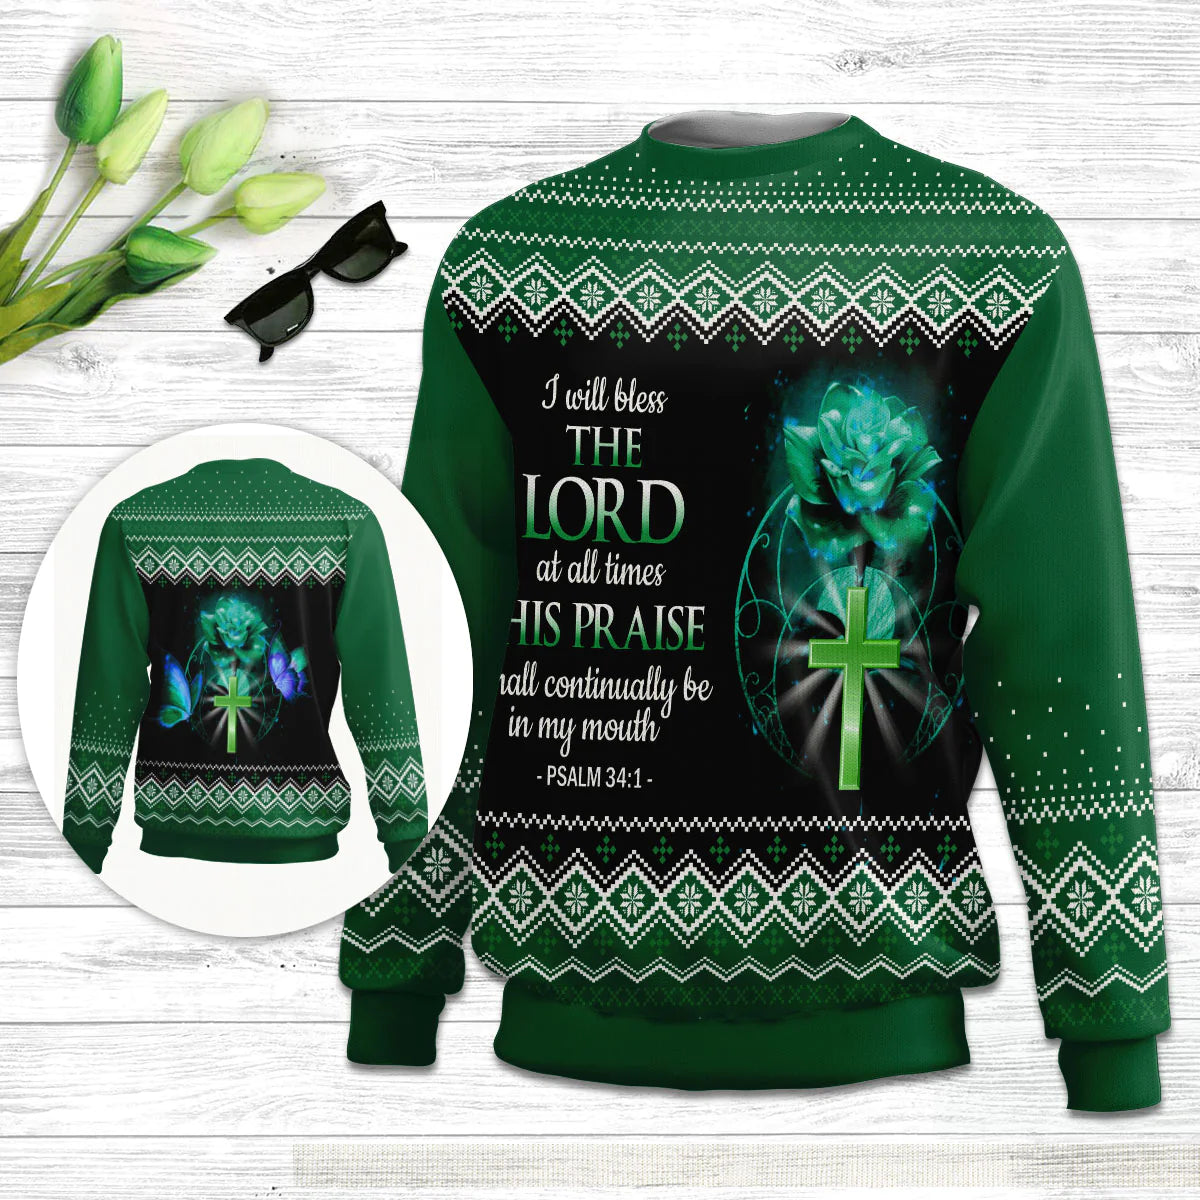 Christianartbag 3D Sweater, I Will Bless The Lord At All Times Psalm 34:1, Unisex Sweater, Christmas Gift. - Christian Art Bag